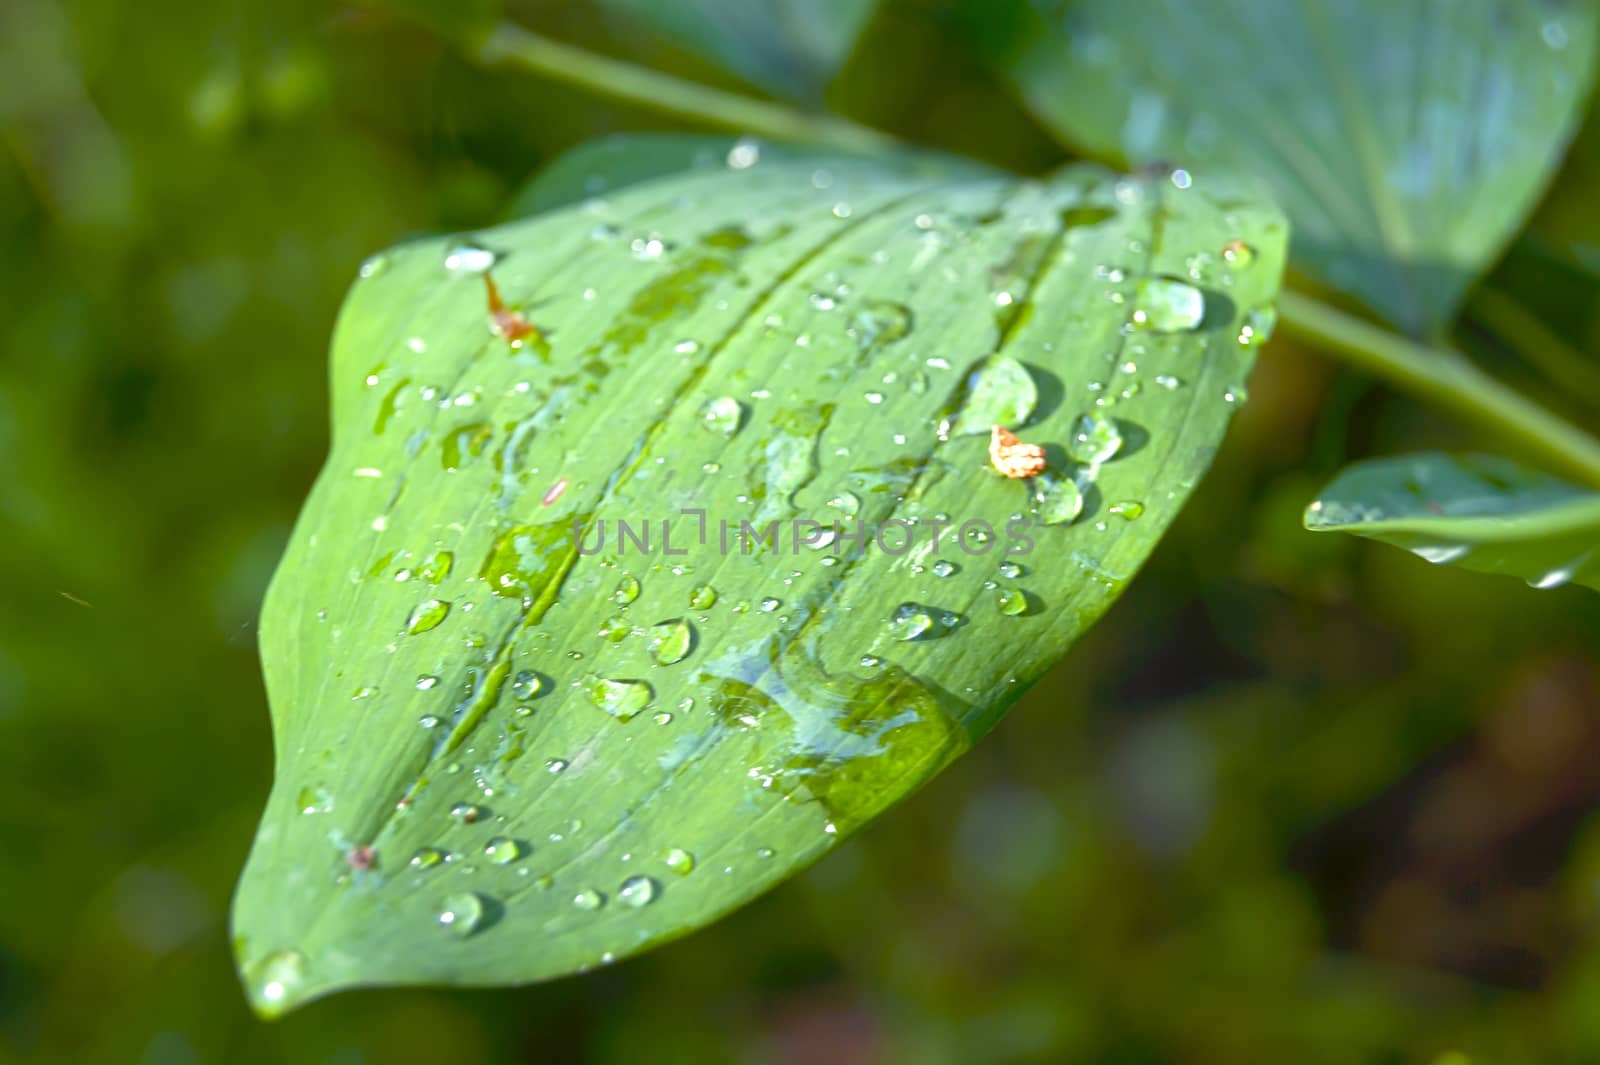 Raindrops by Gostick